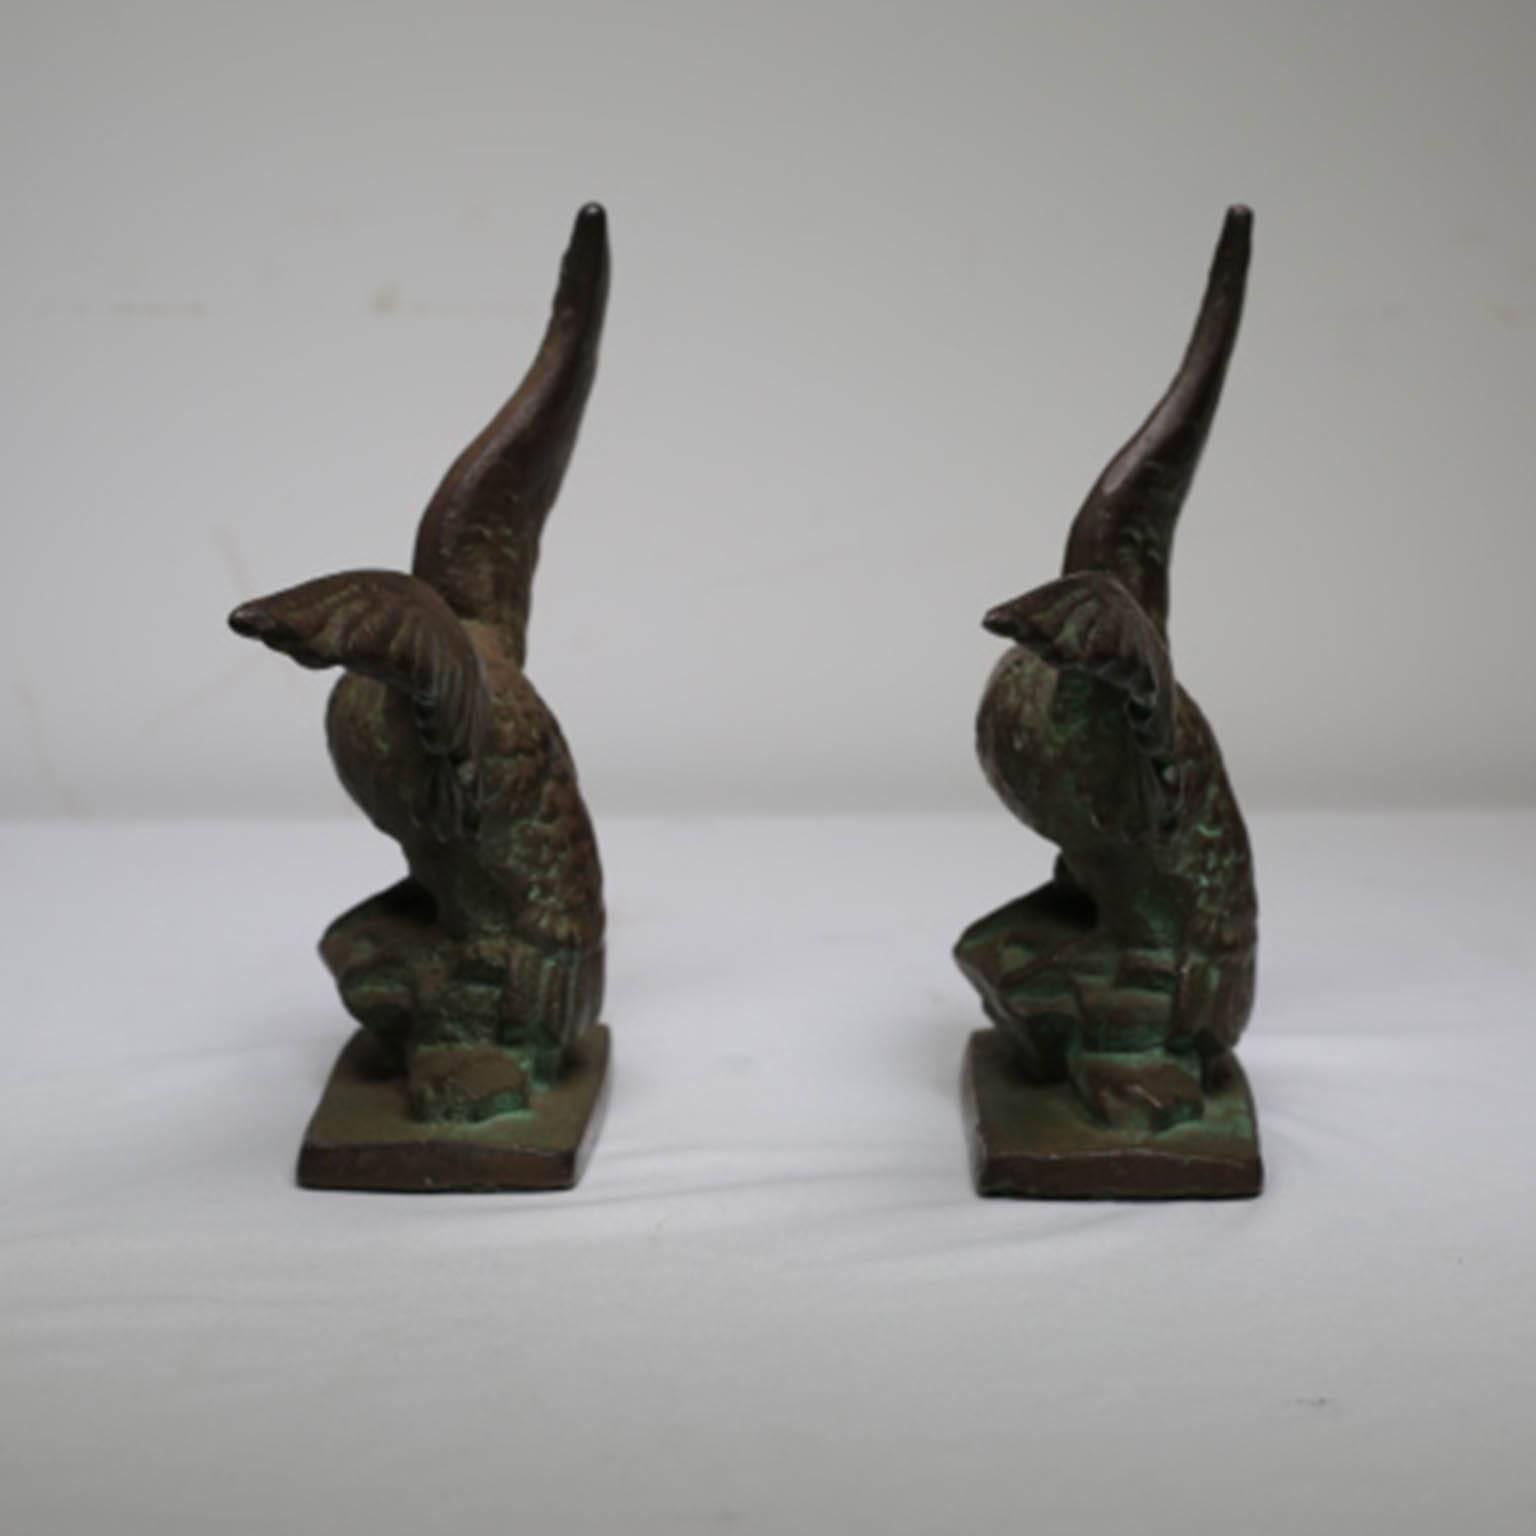 Early 20th century solid bronze eagle bookends, circa 1940s.